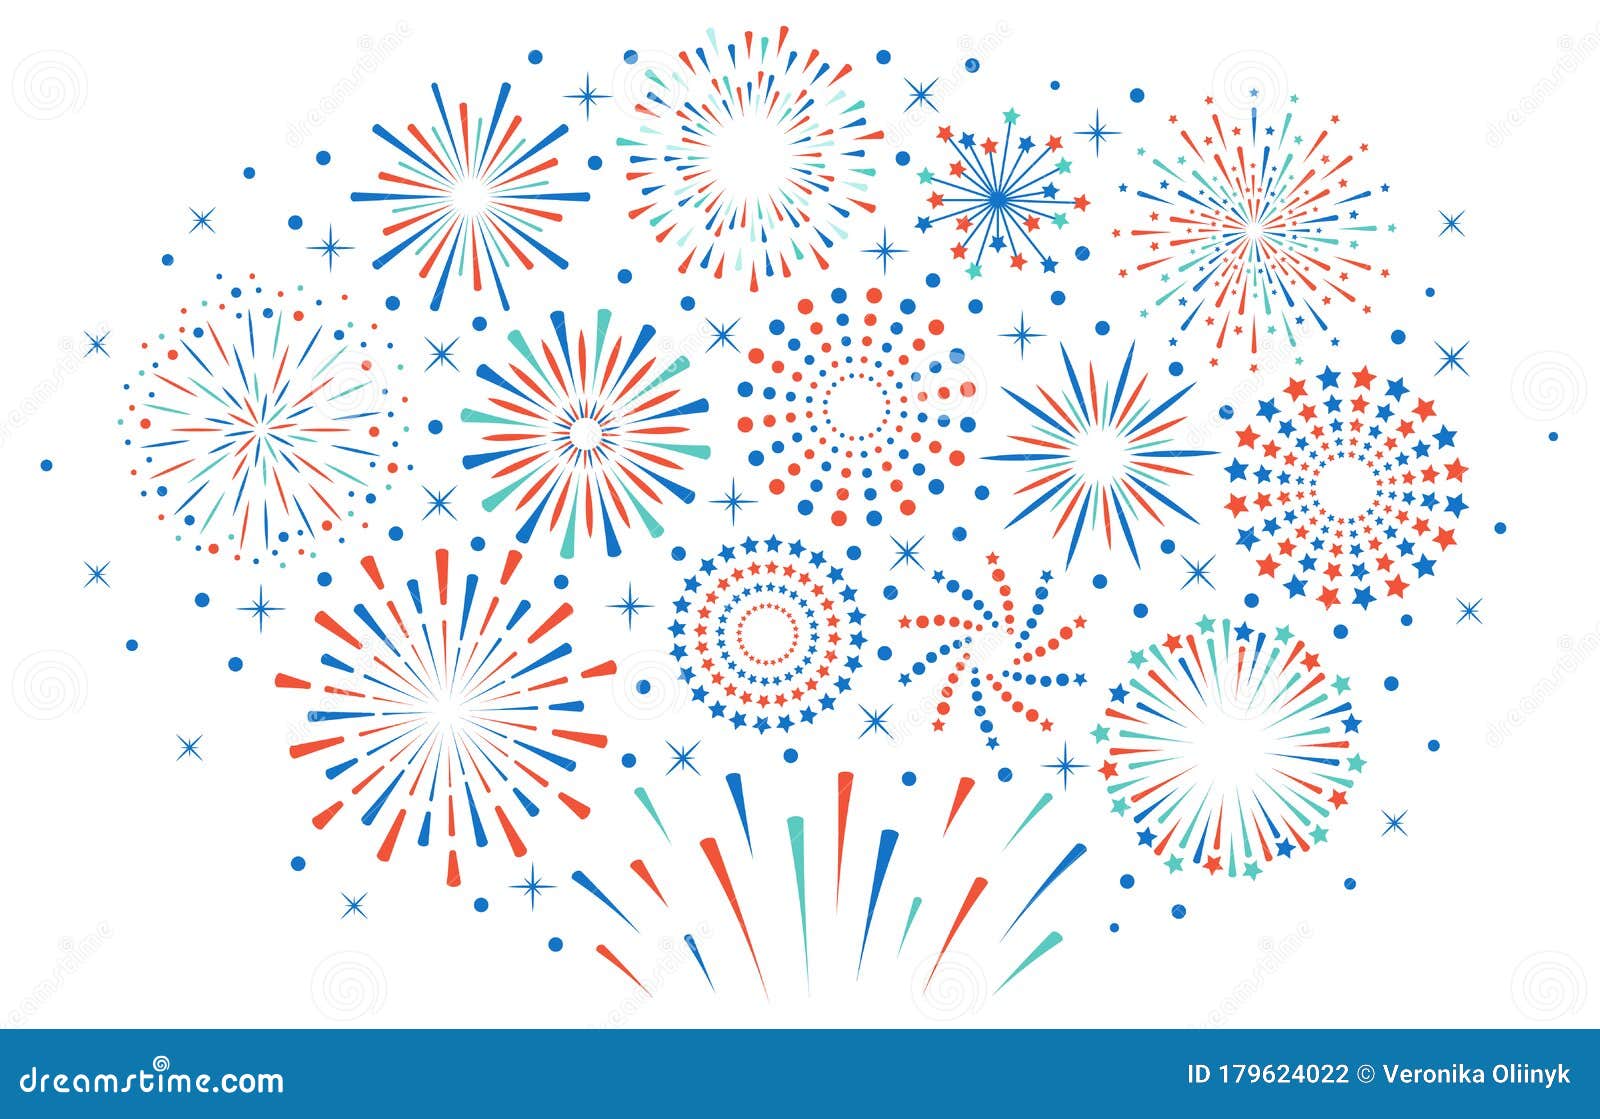 happy 4th july fireworks. celebration firework explode, carnival party firecracker explosions. colorful festival